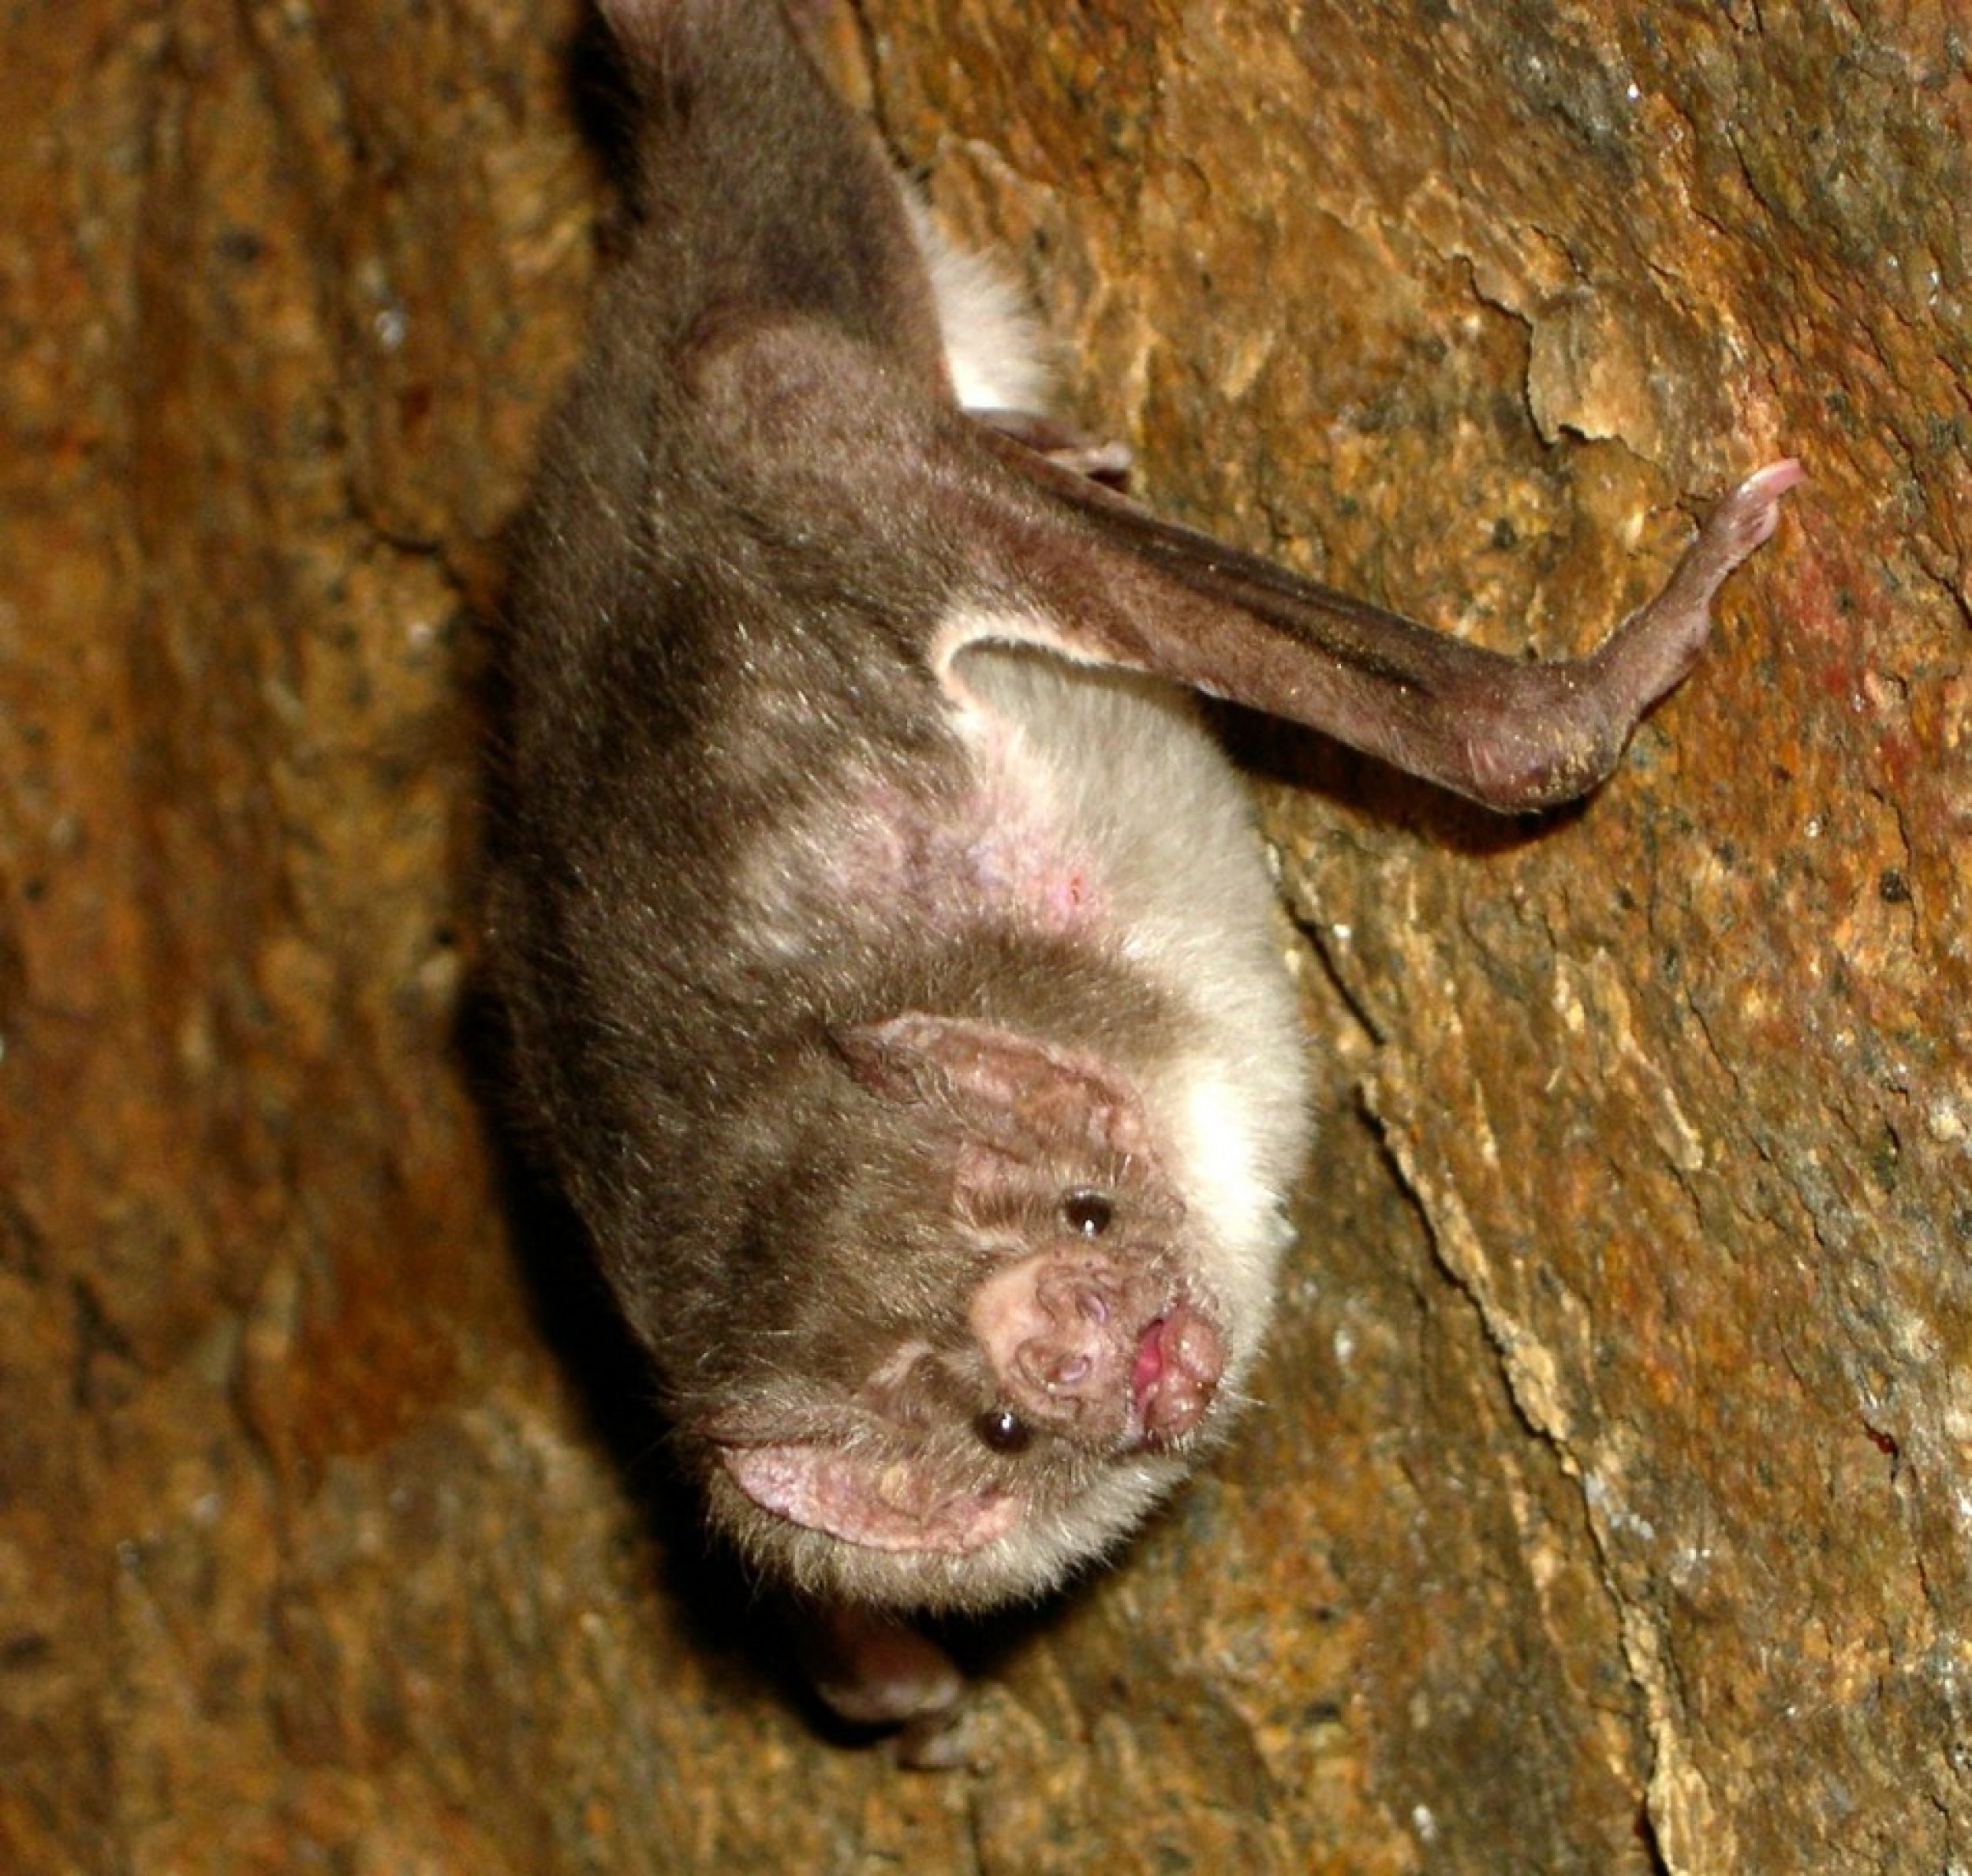 Social Bats Have High Rates of Deadly Fungal Disease Study